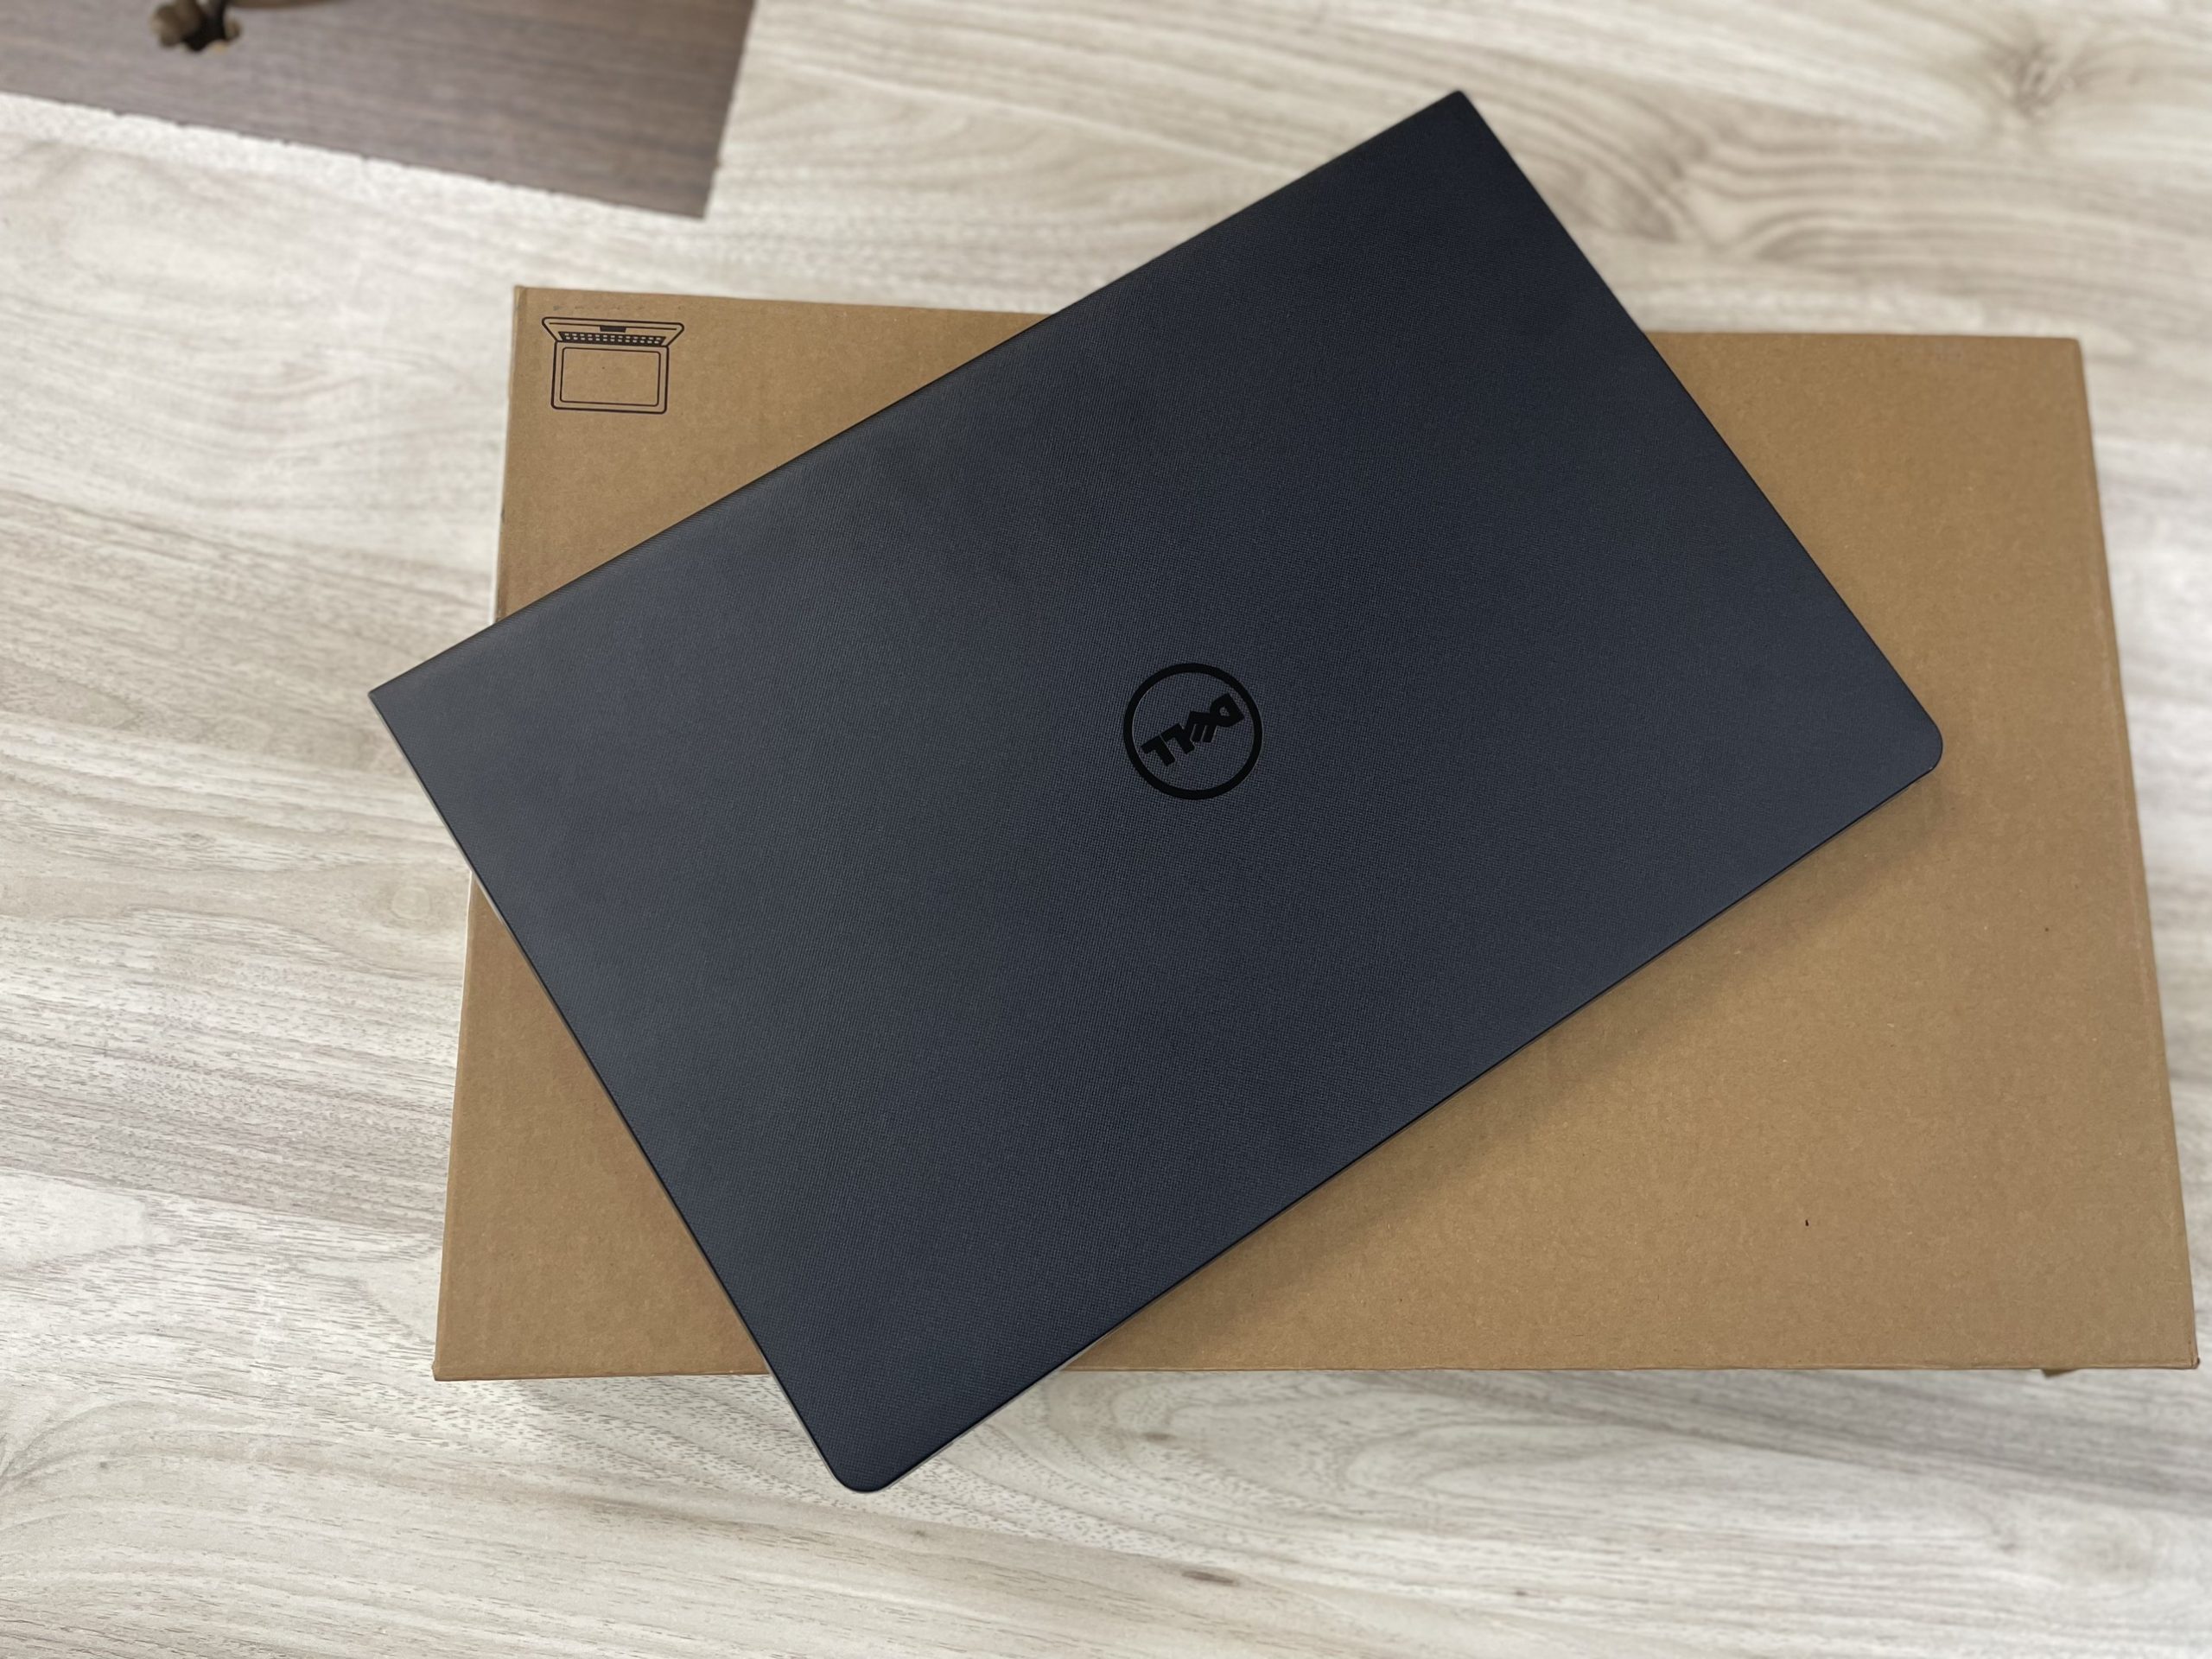 LAPTOP DELL INSPIRON 3565 MỚI 100%